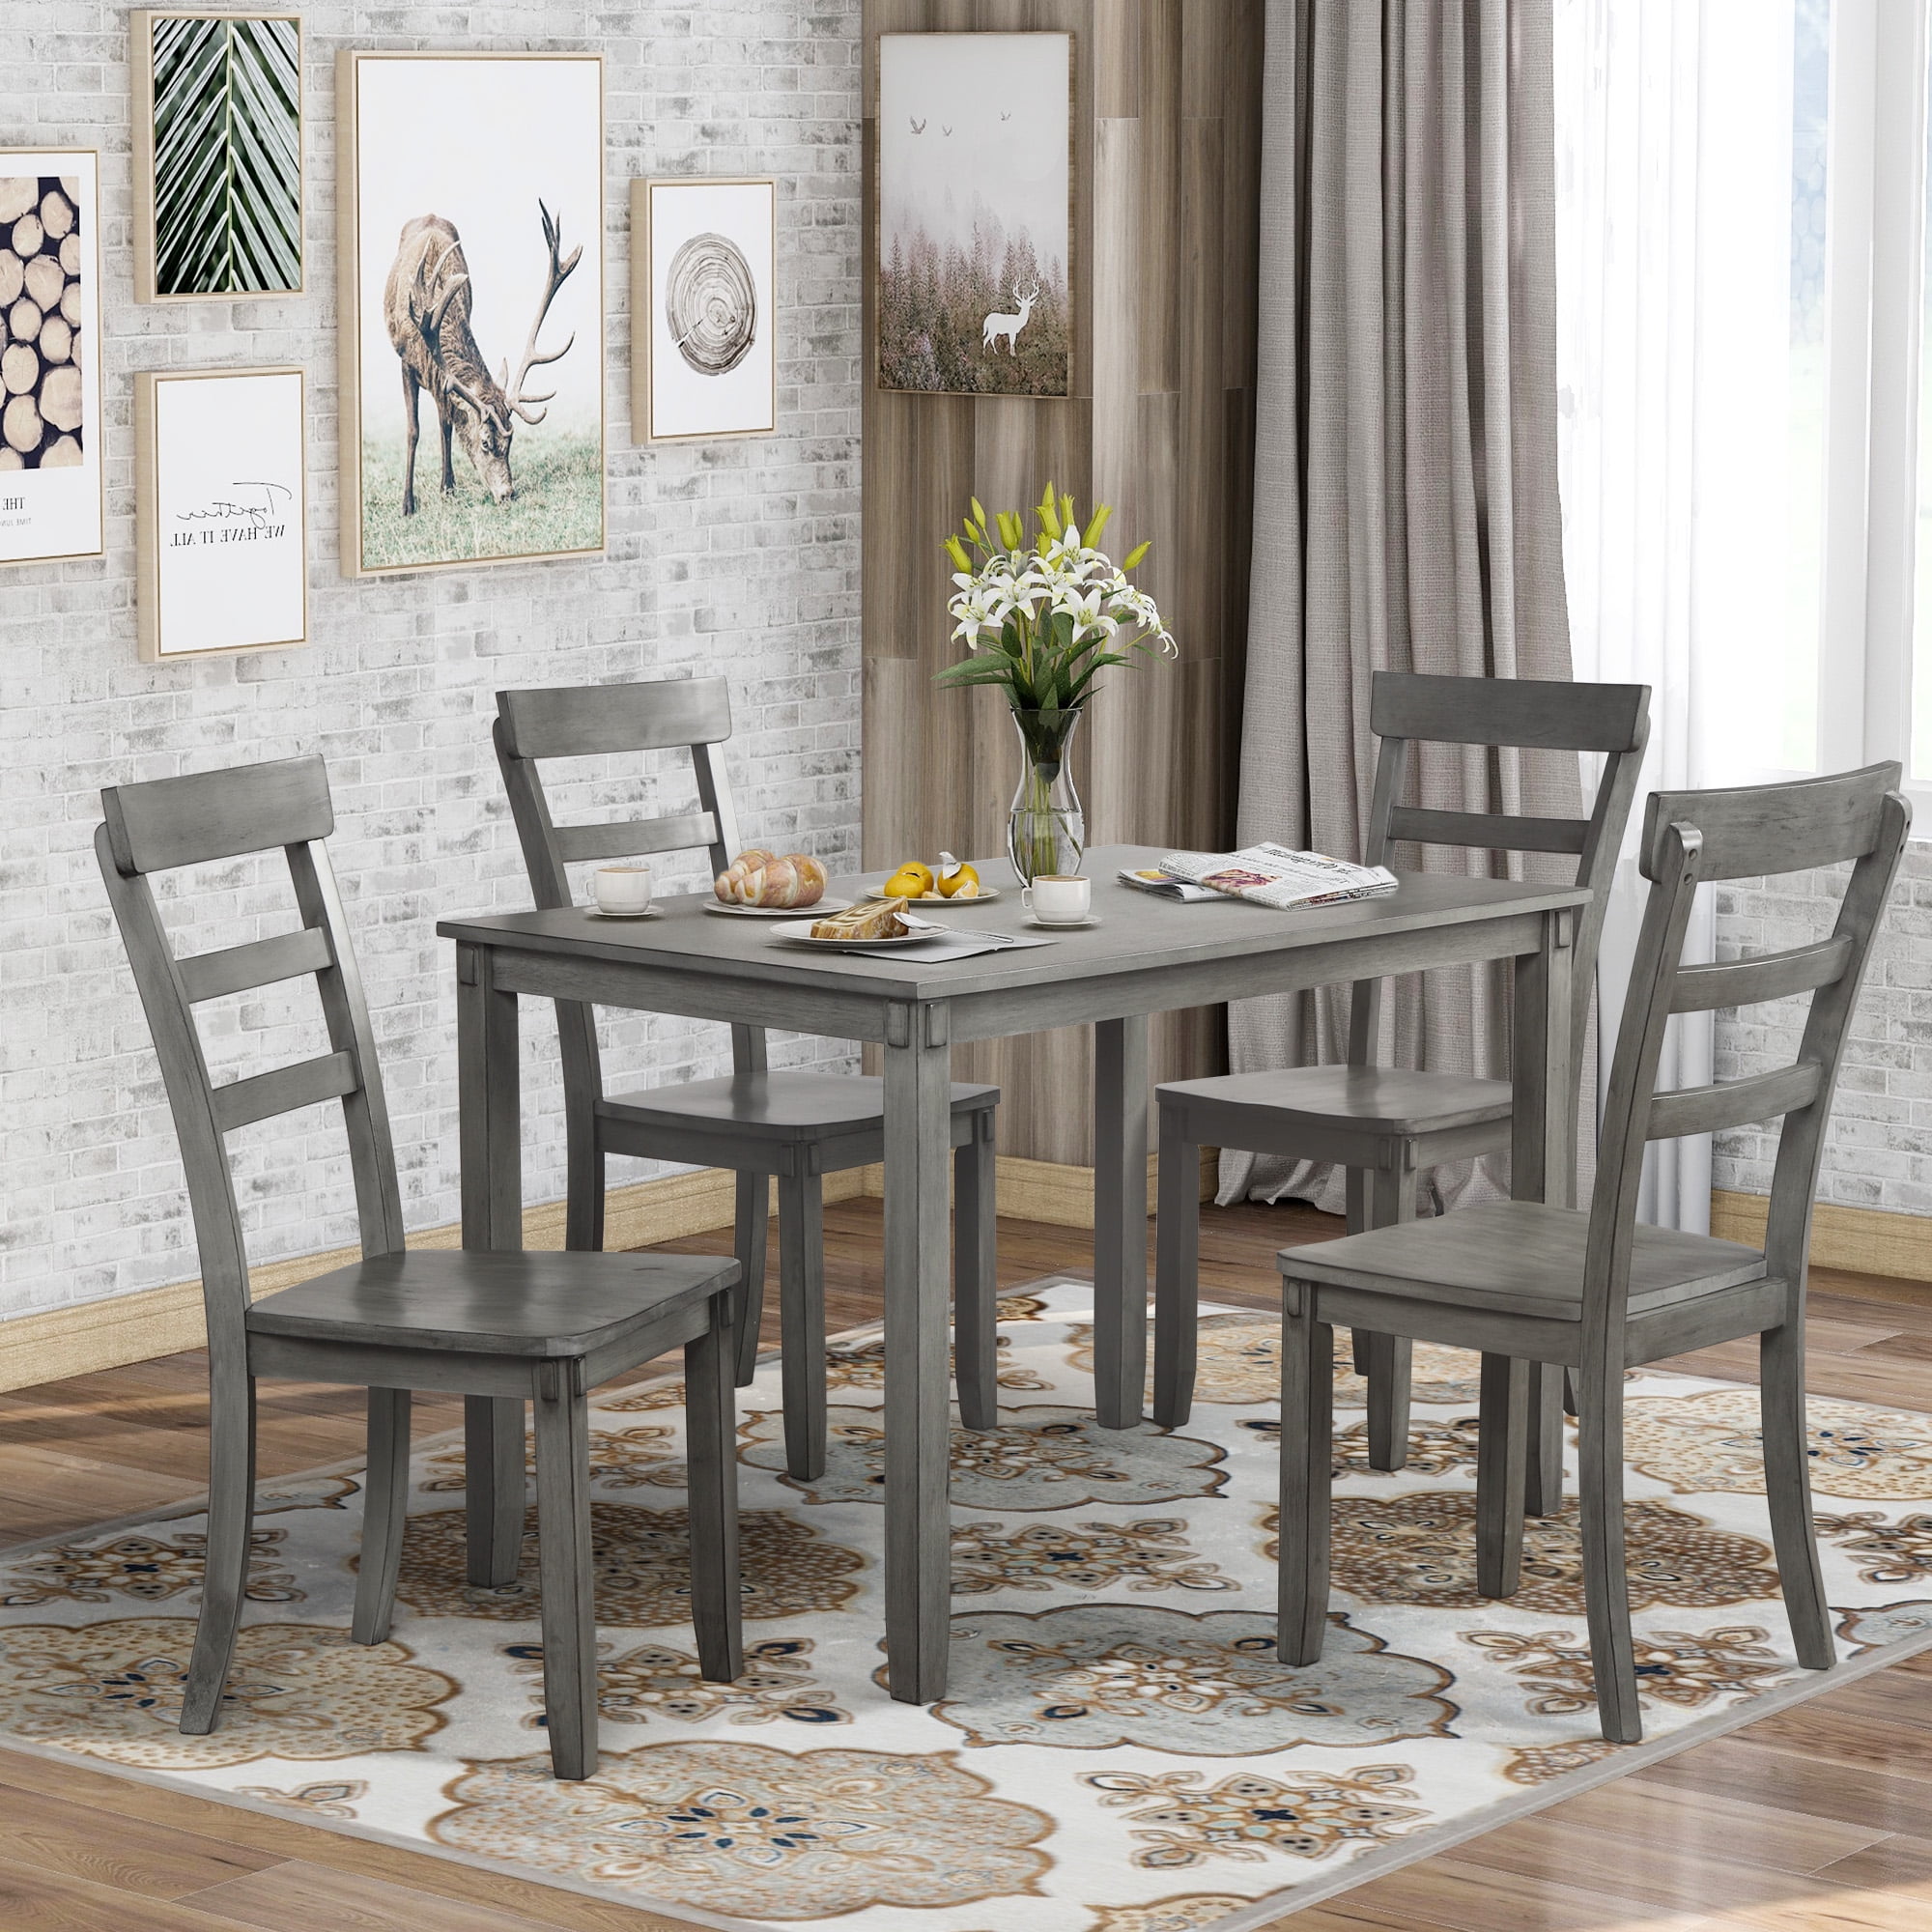 Modern 5 Piece Dining Sets, URHOMEPRO Wooden Dining Table Set for 4